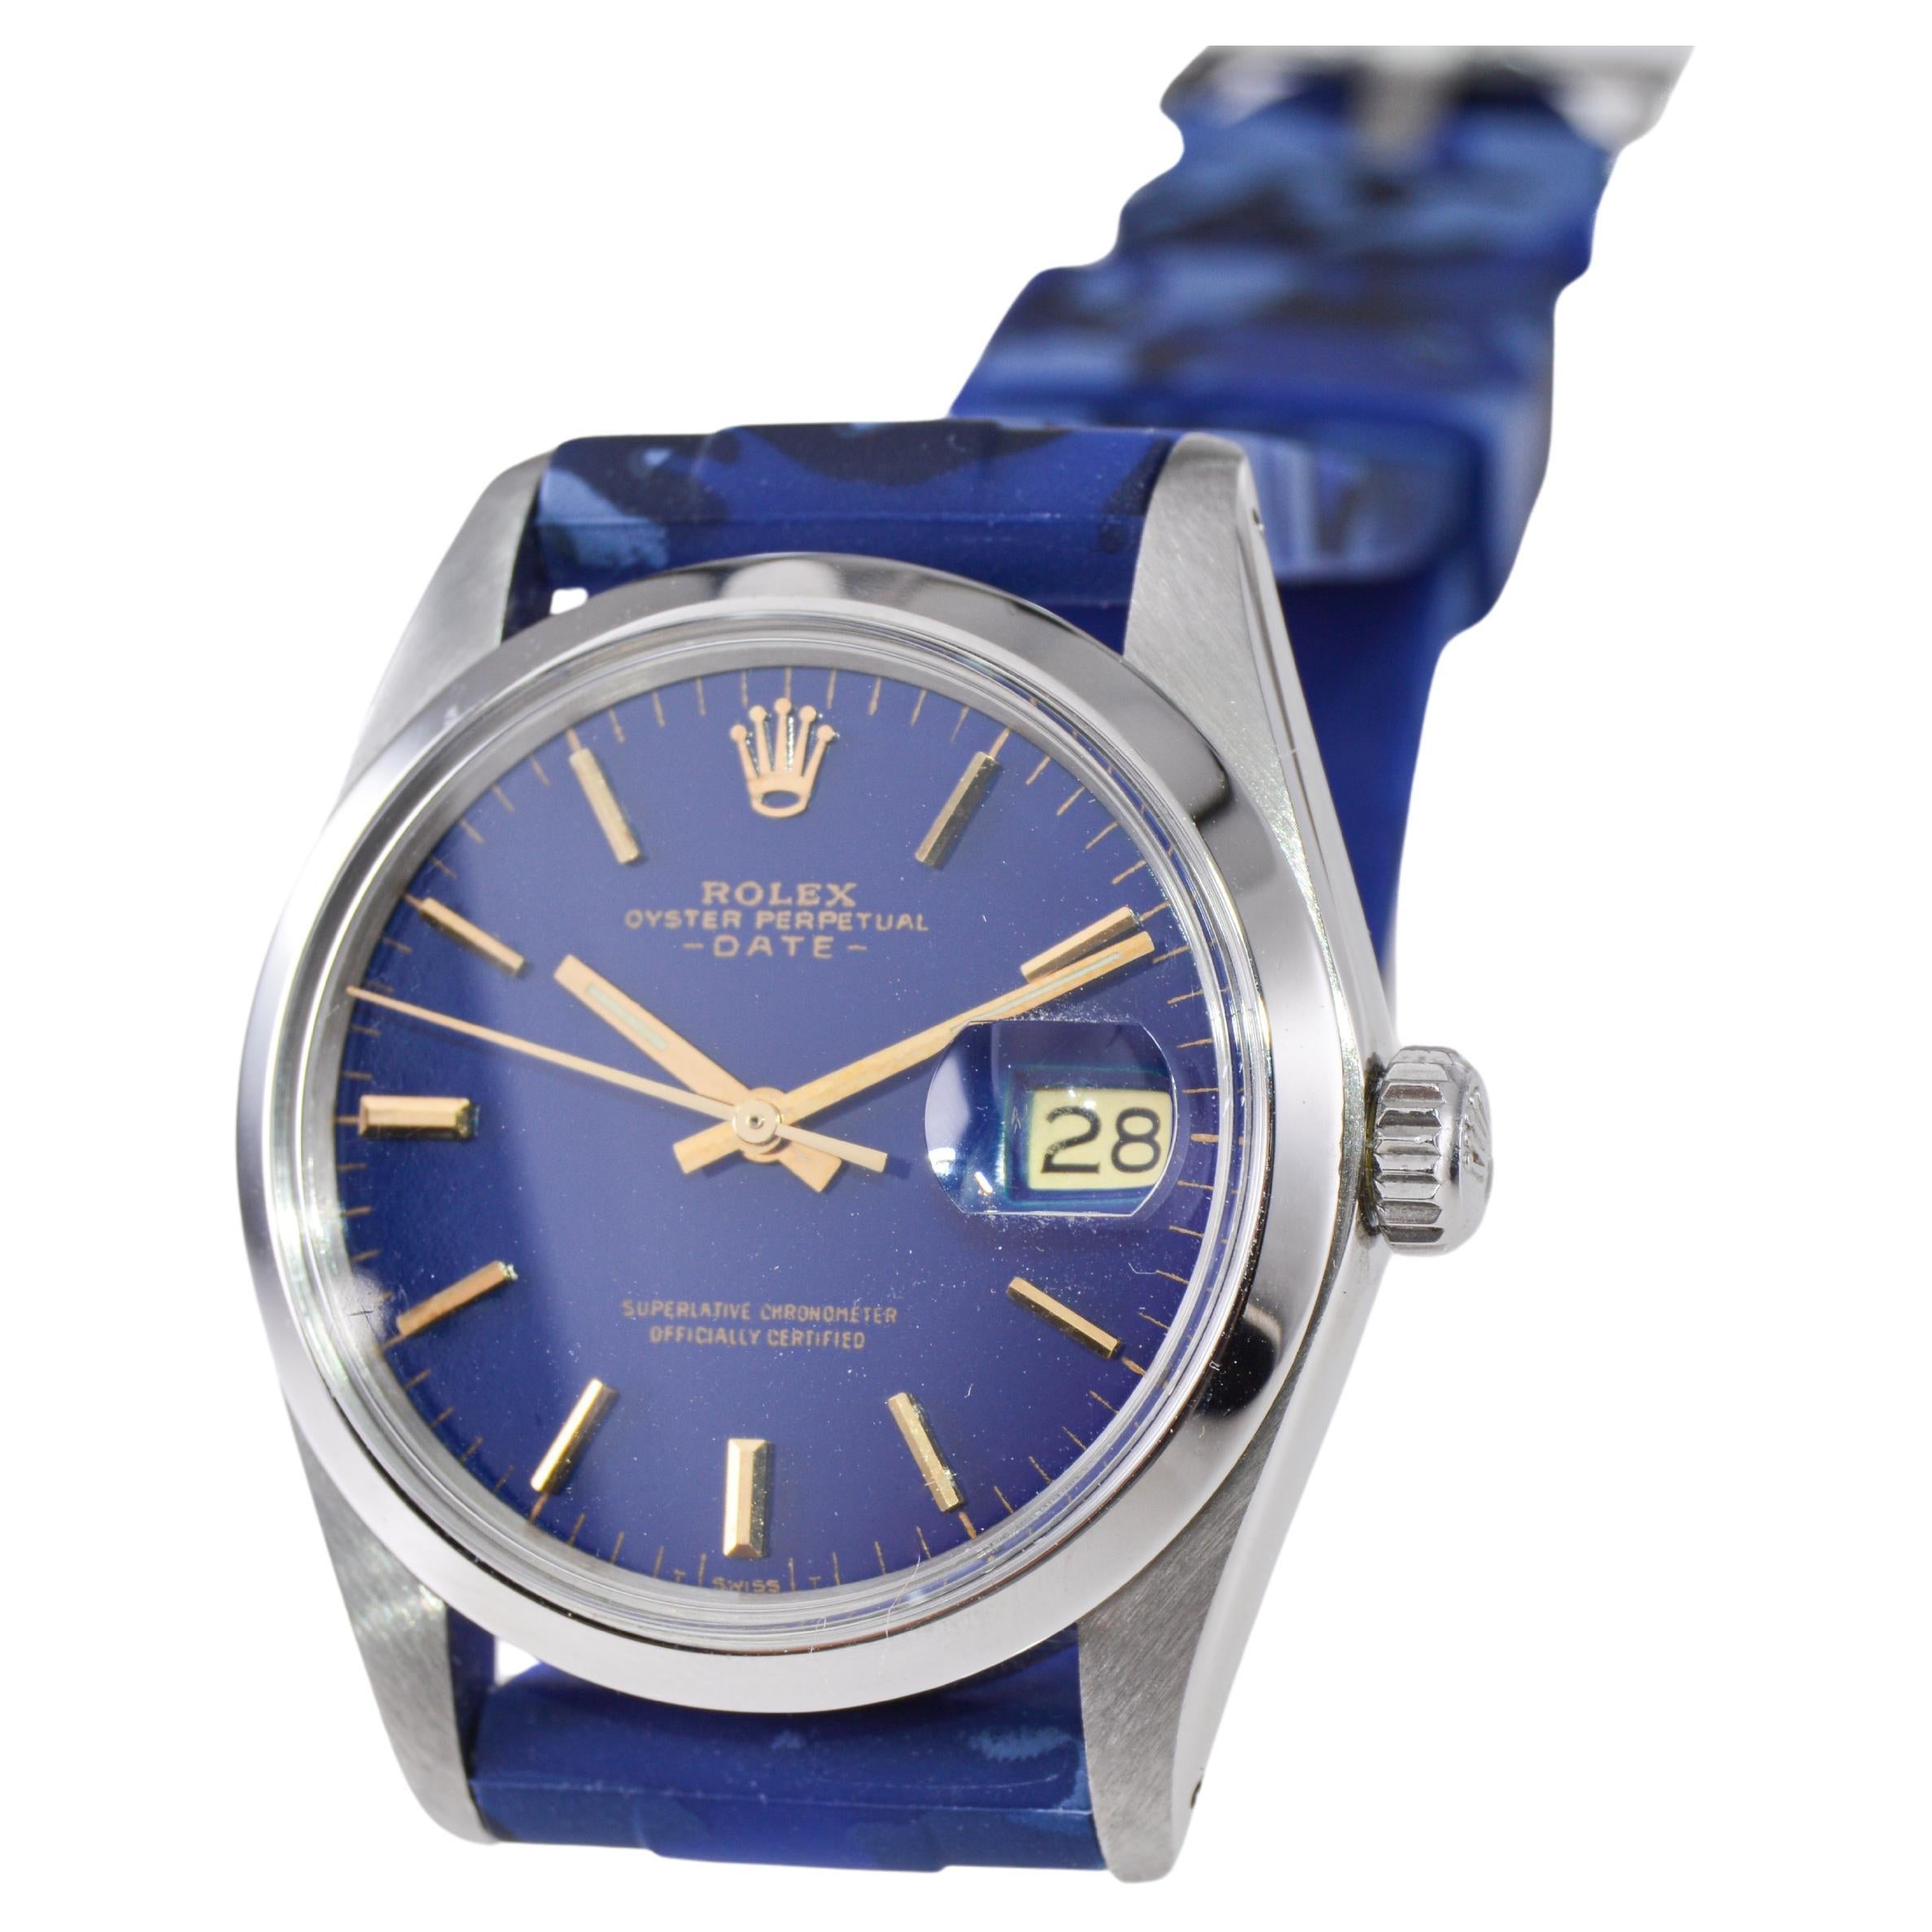 Women's or Men's Rolex Oyster Perpetual Date With Custom Blue Dial 1975